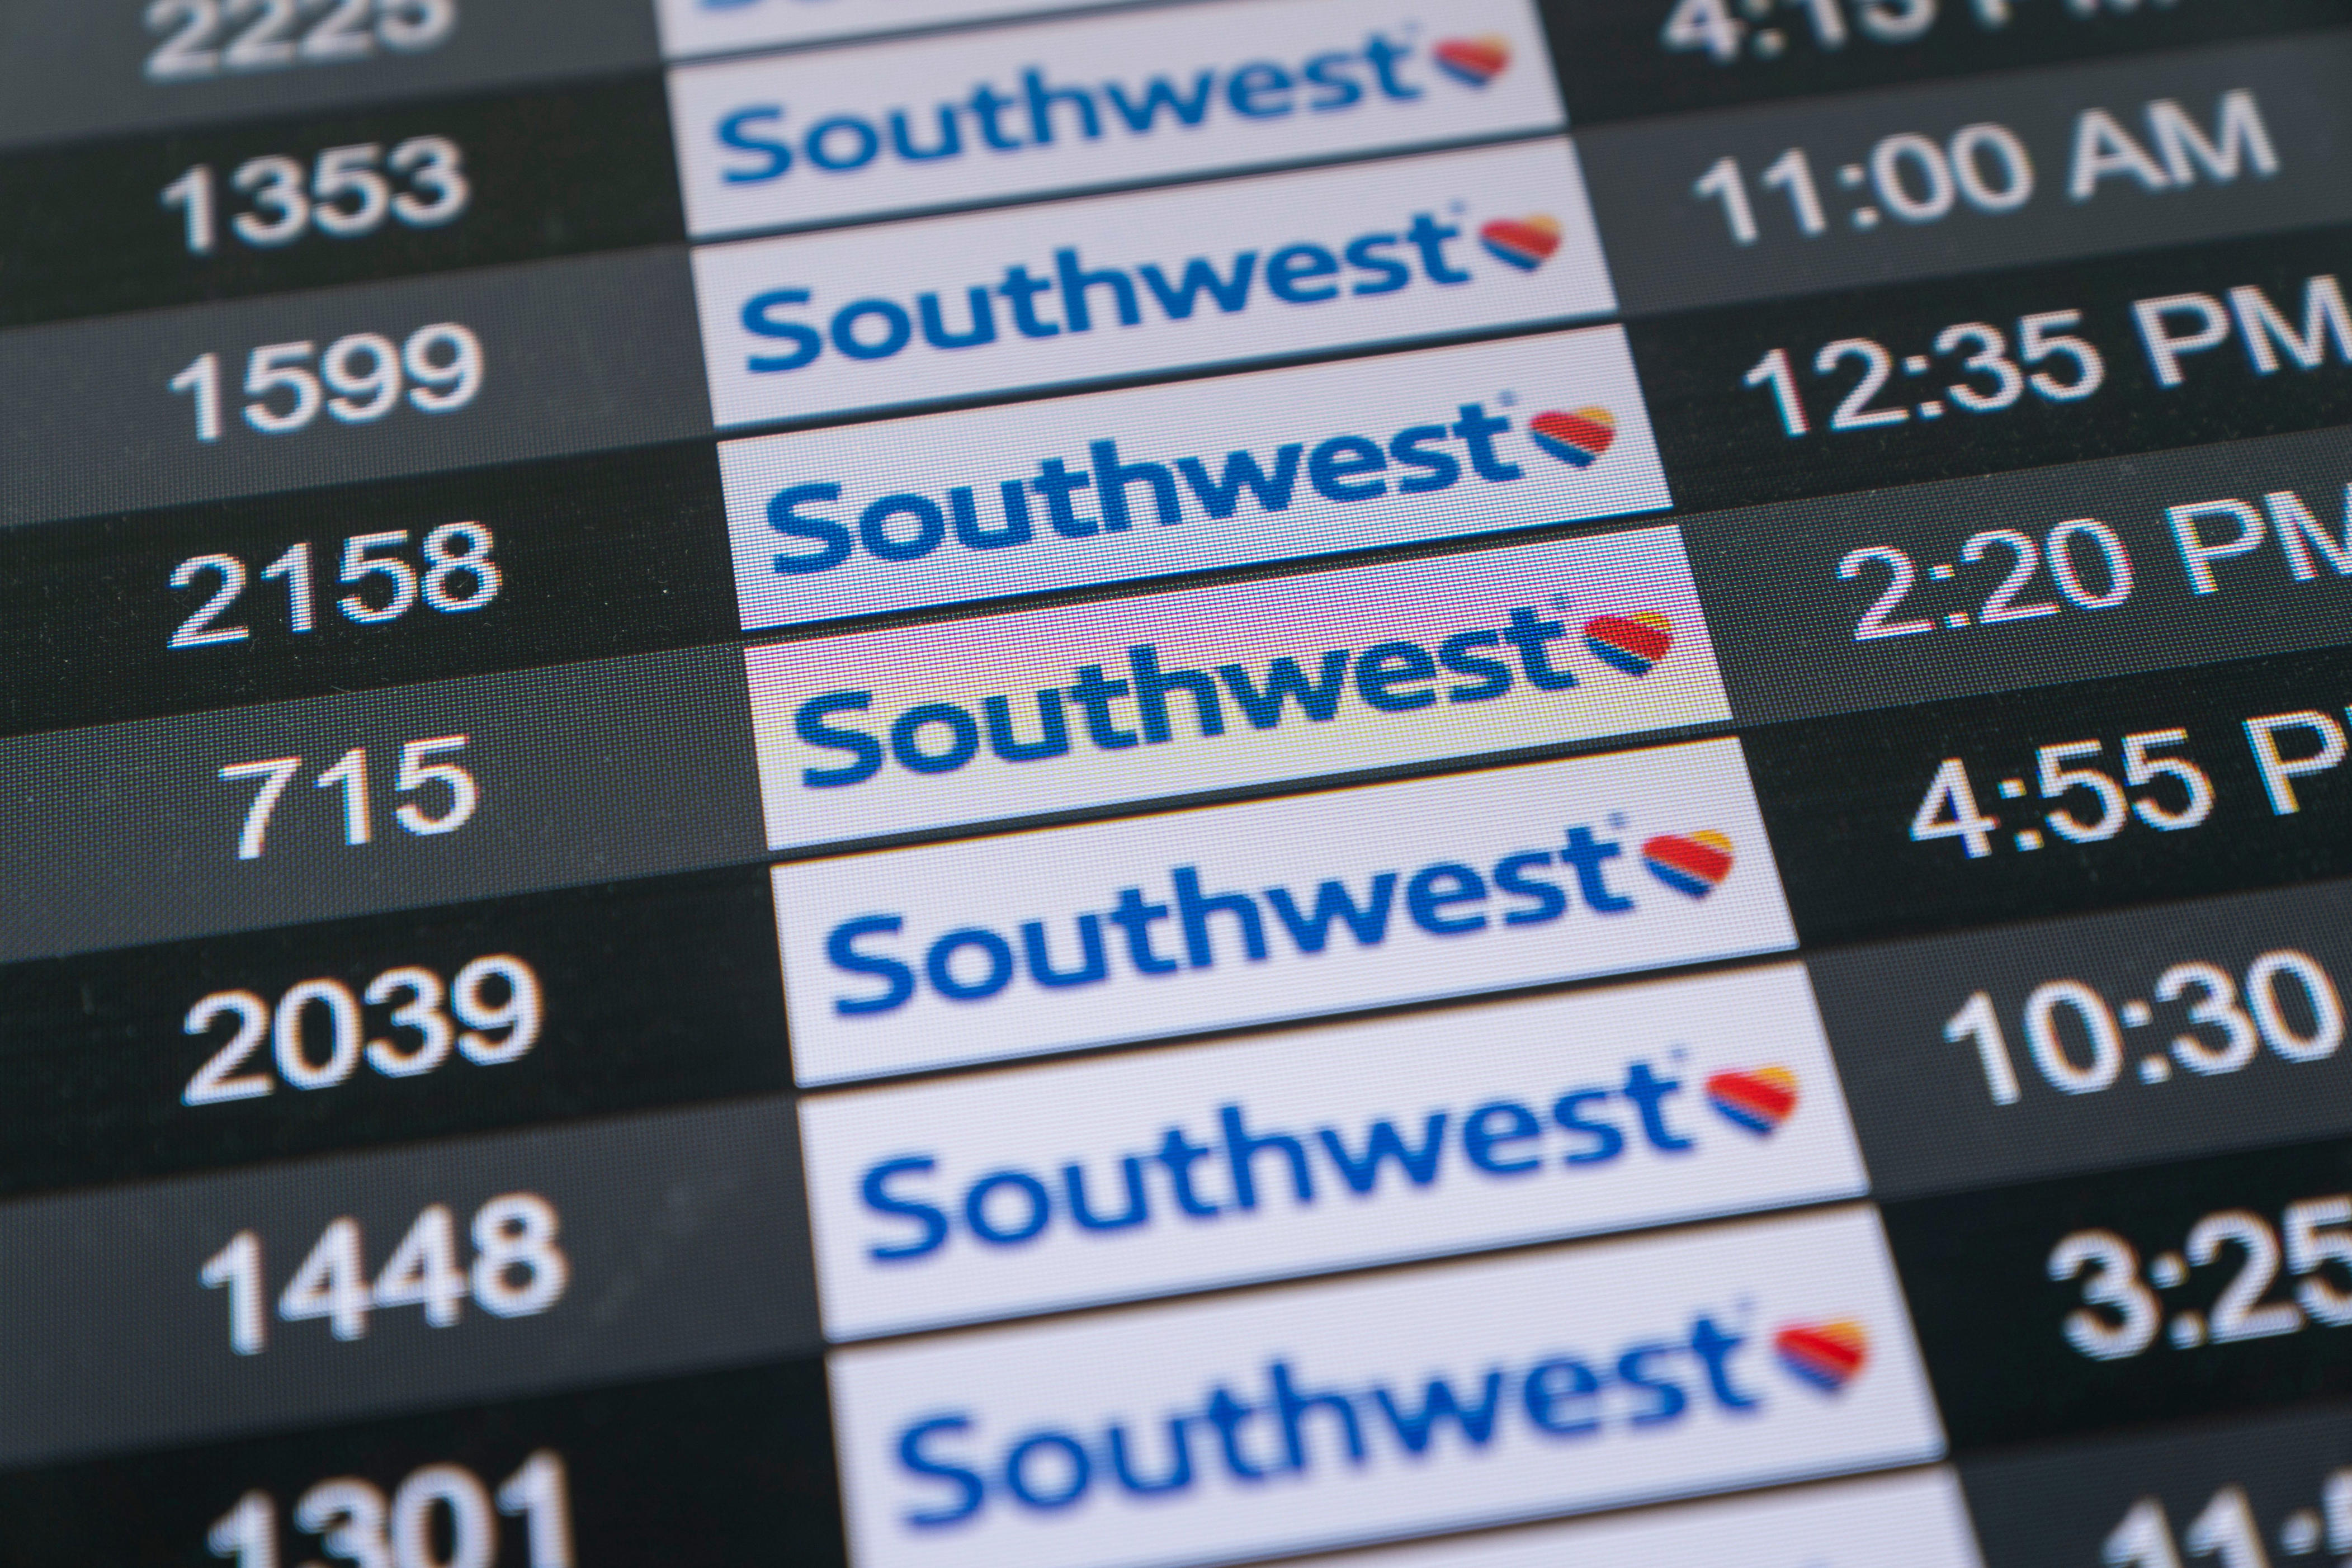 A screen shows arrival times for Southwest Airlines flights at the Los Angeles International Airport in Los Angeles, Tuesday, April 18, 2023.